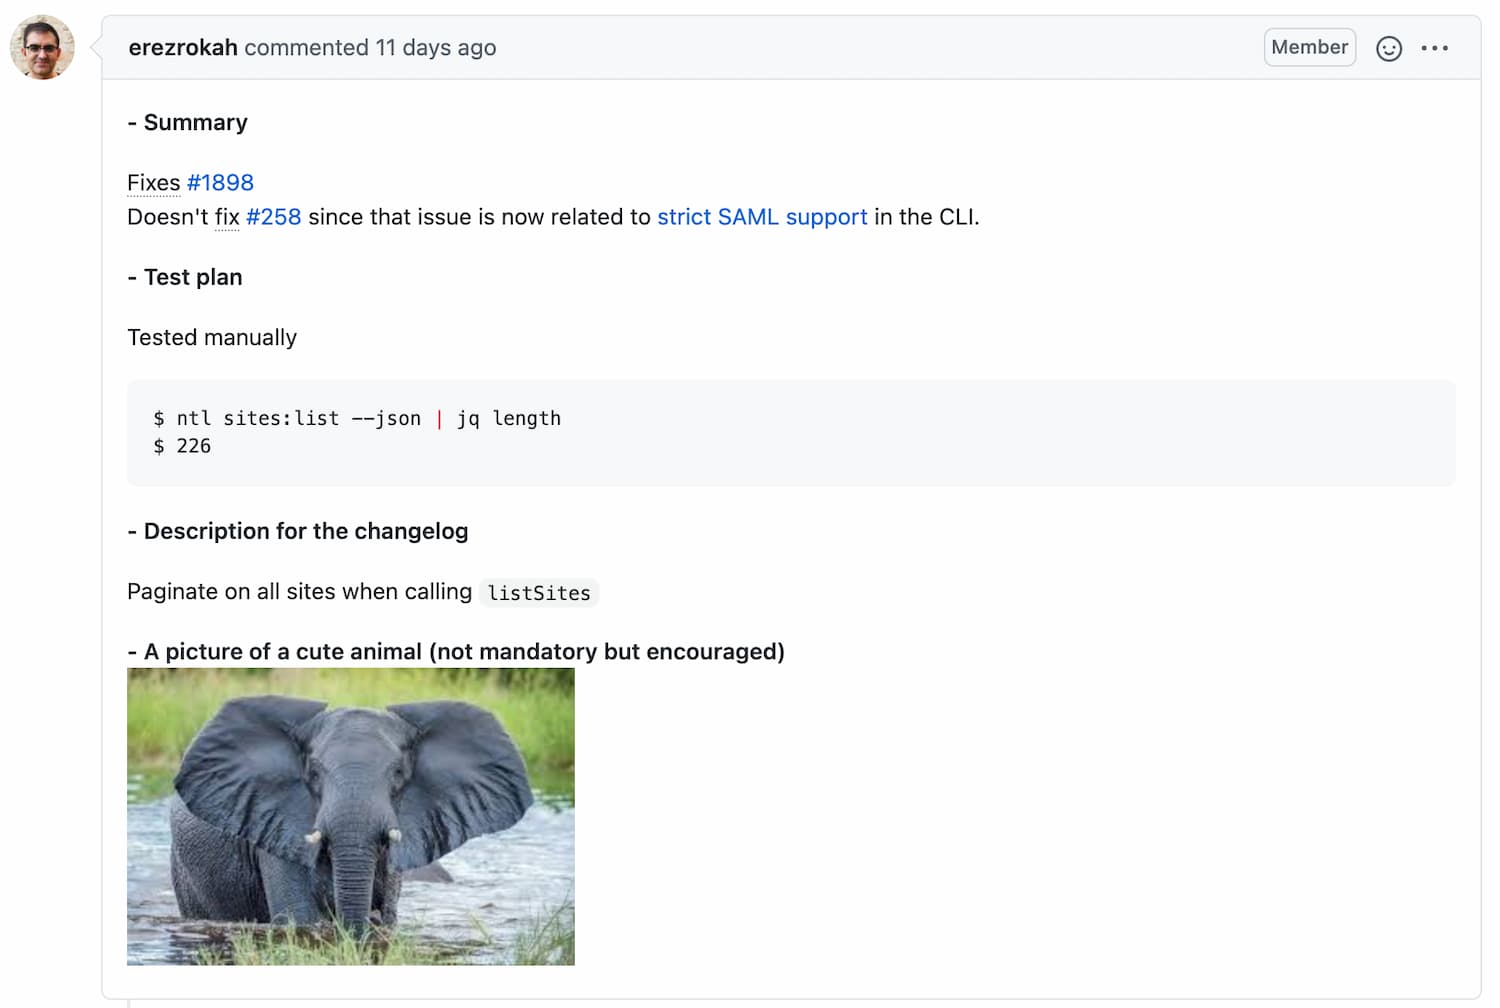 A pull request with a cute baby elephant